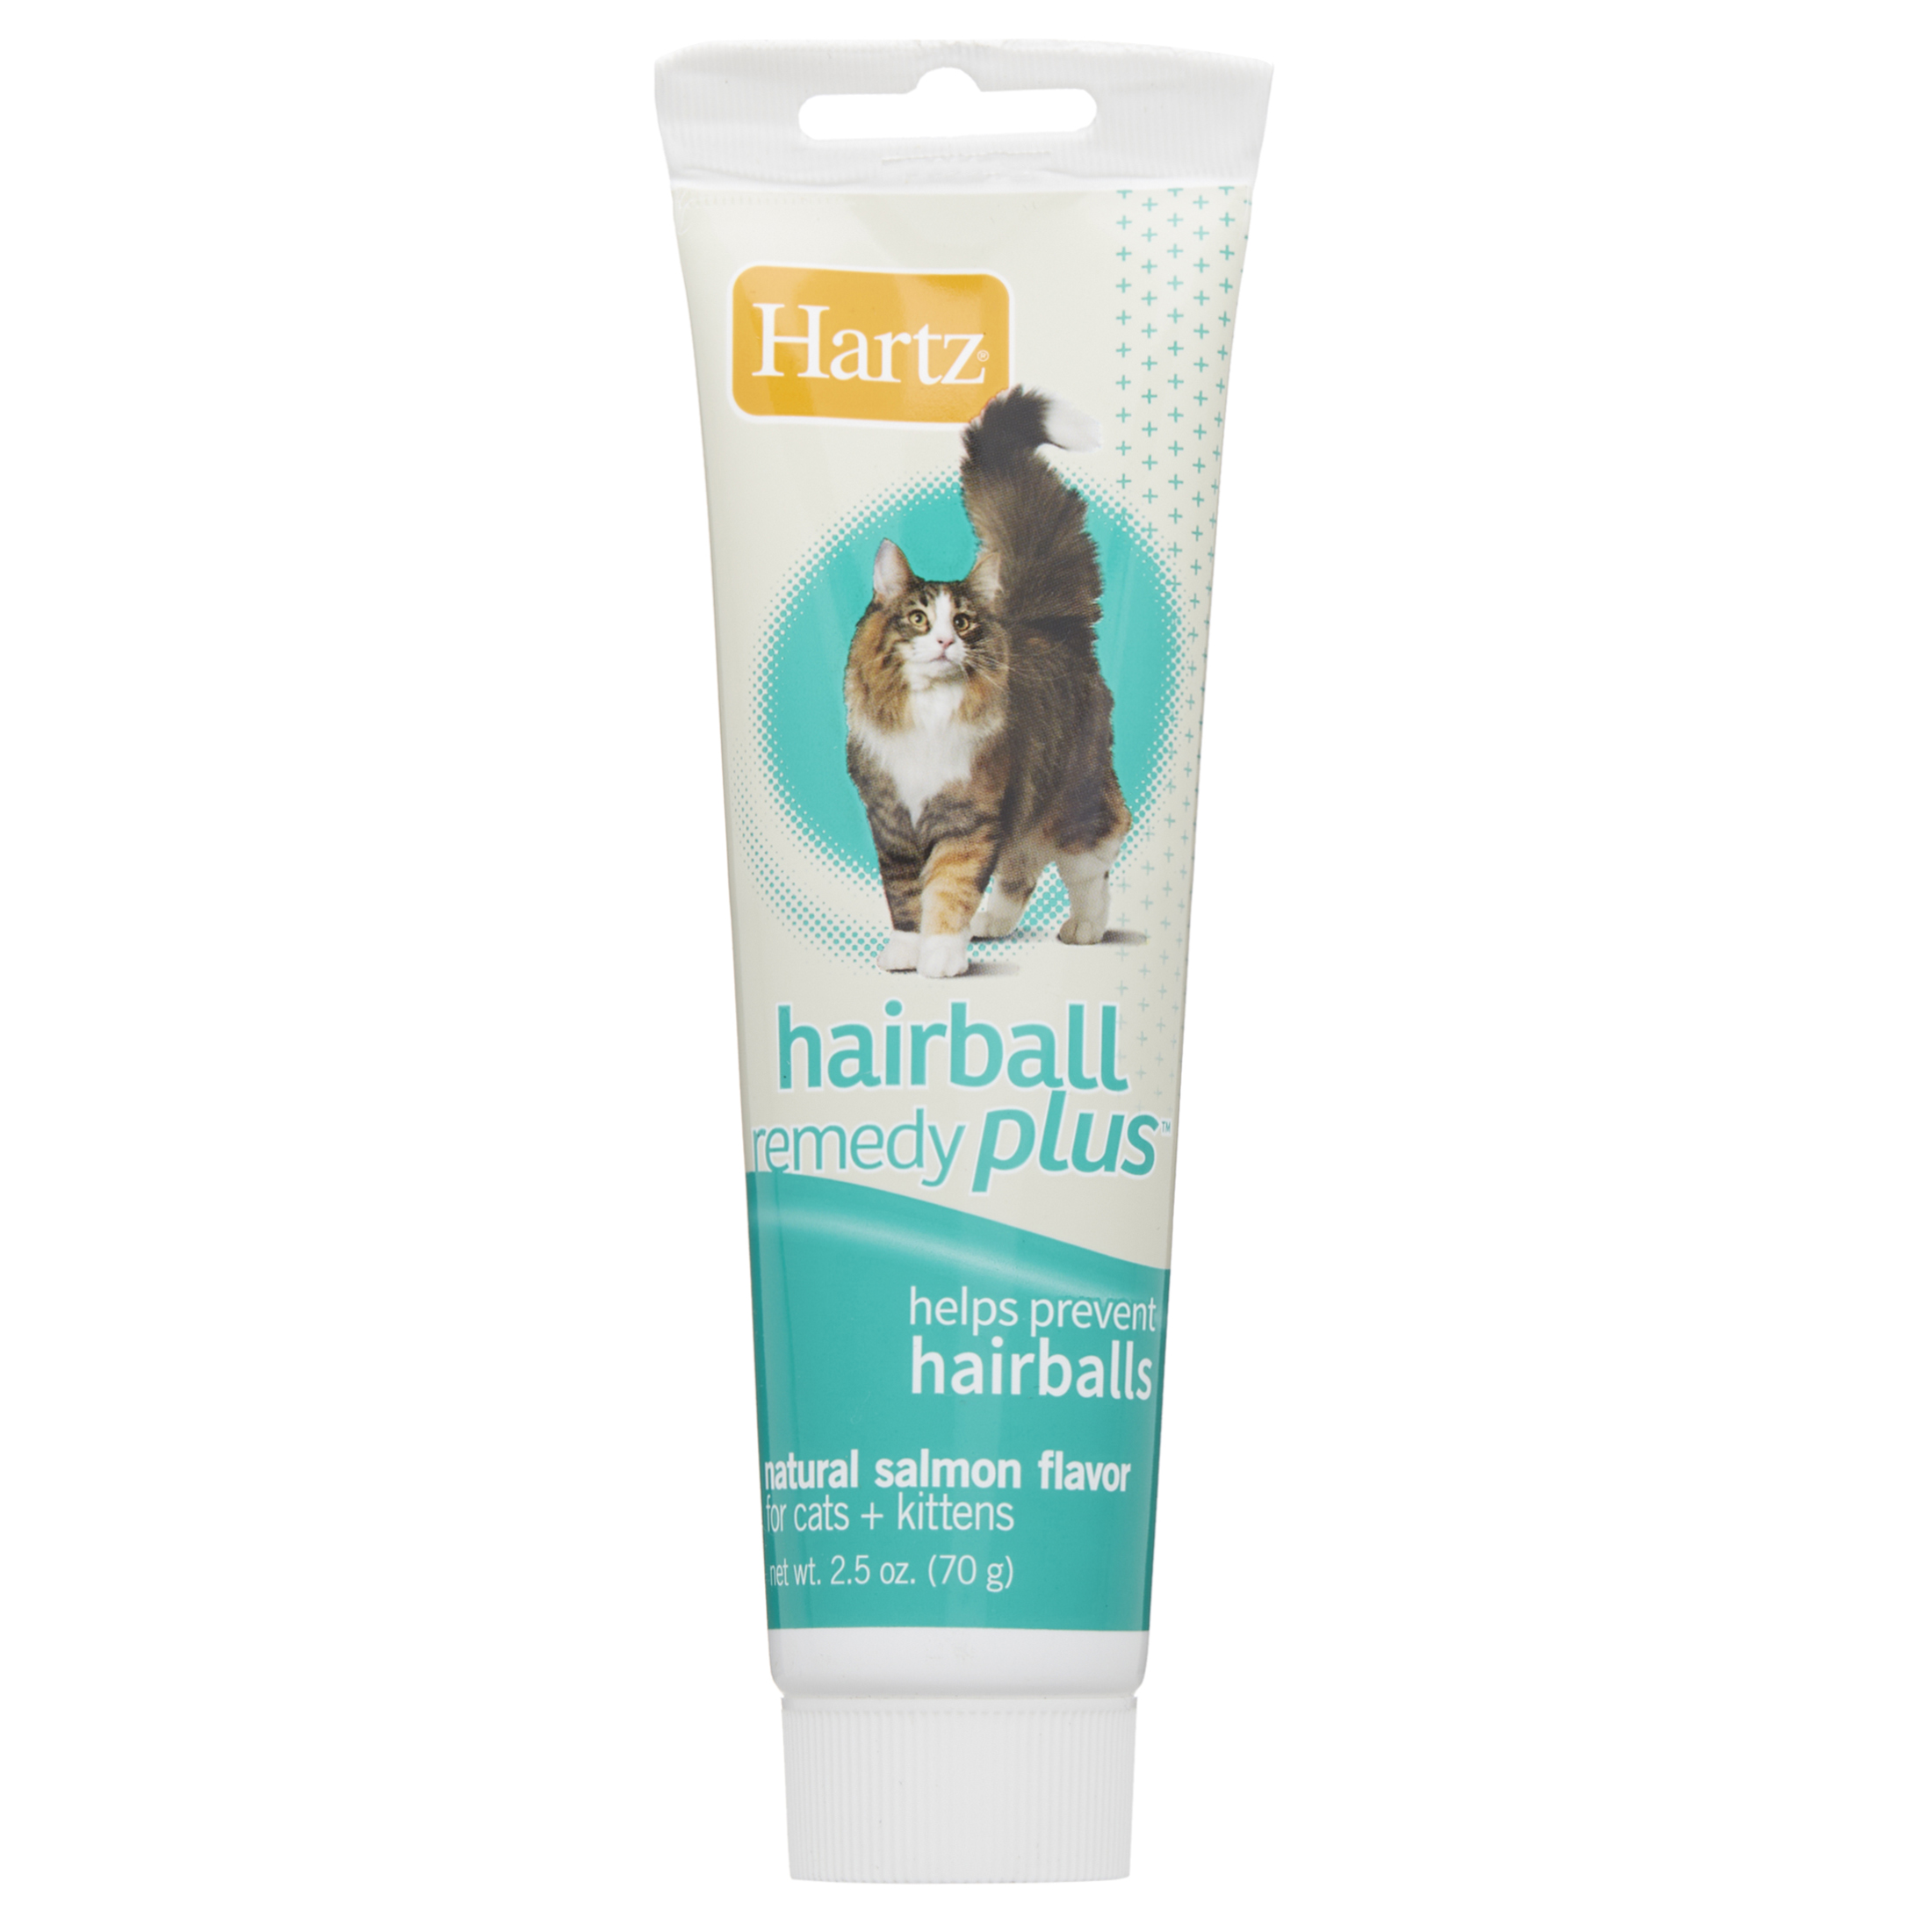 Hartz Hairball Remedy Plus Paste for Cats and Kittens - 2.5oz Tube - image 1 of 6